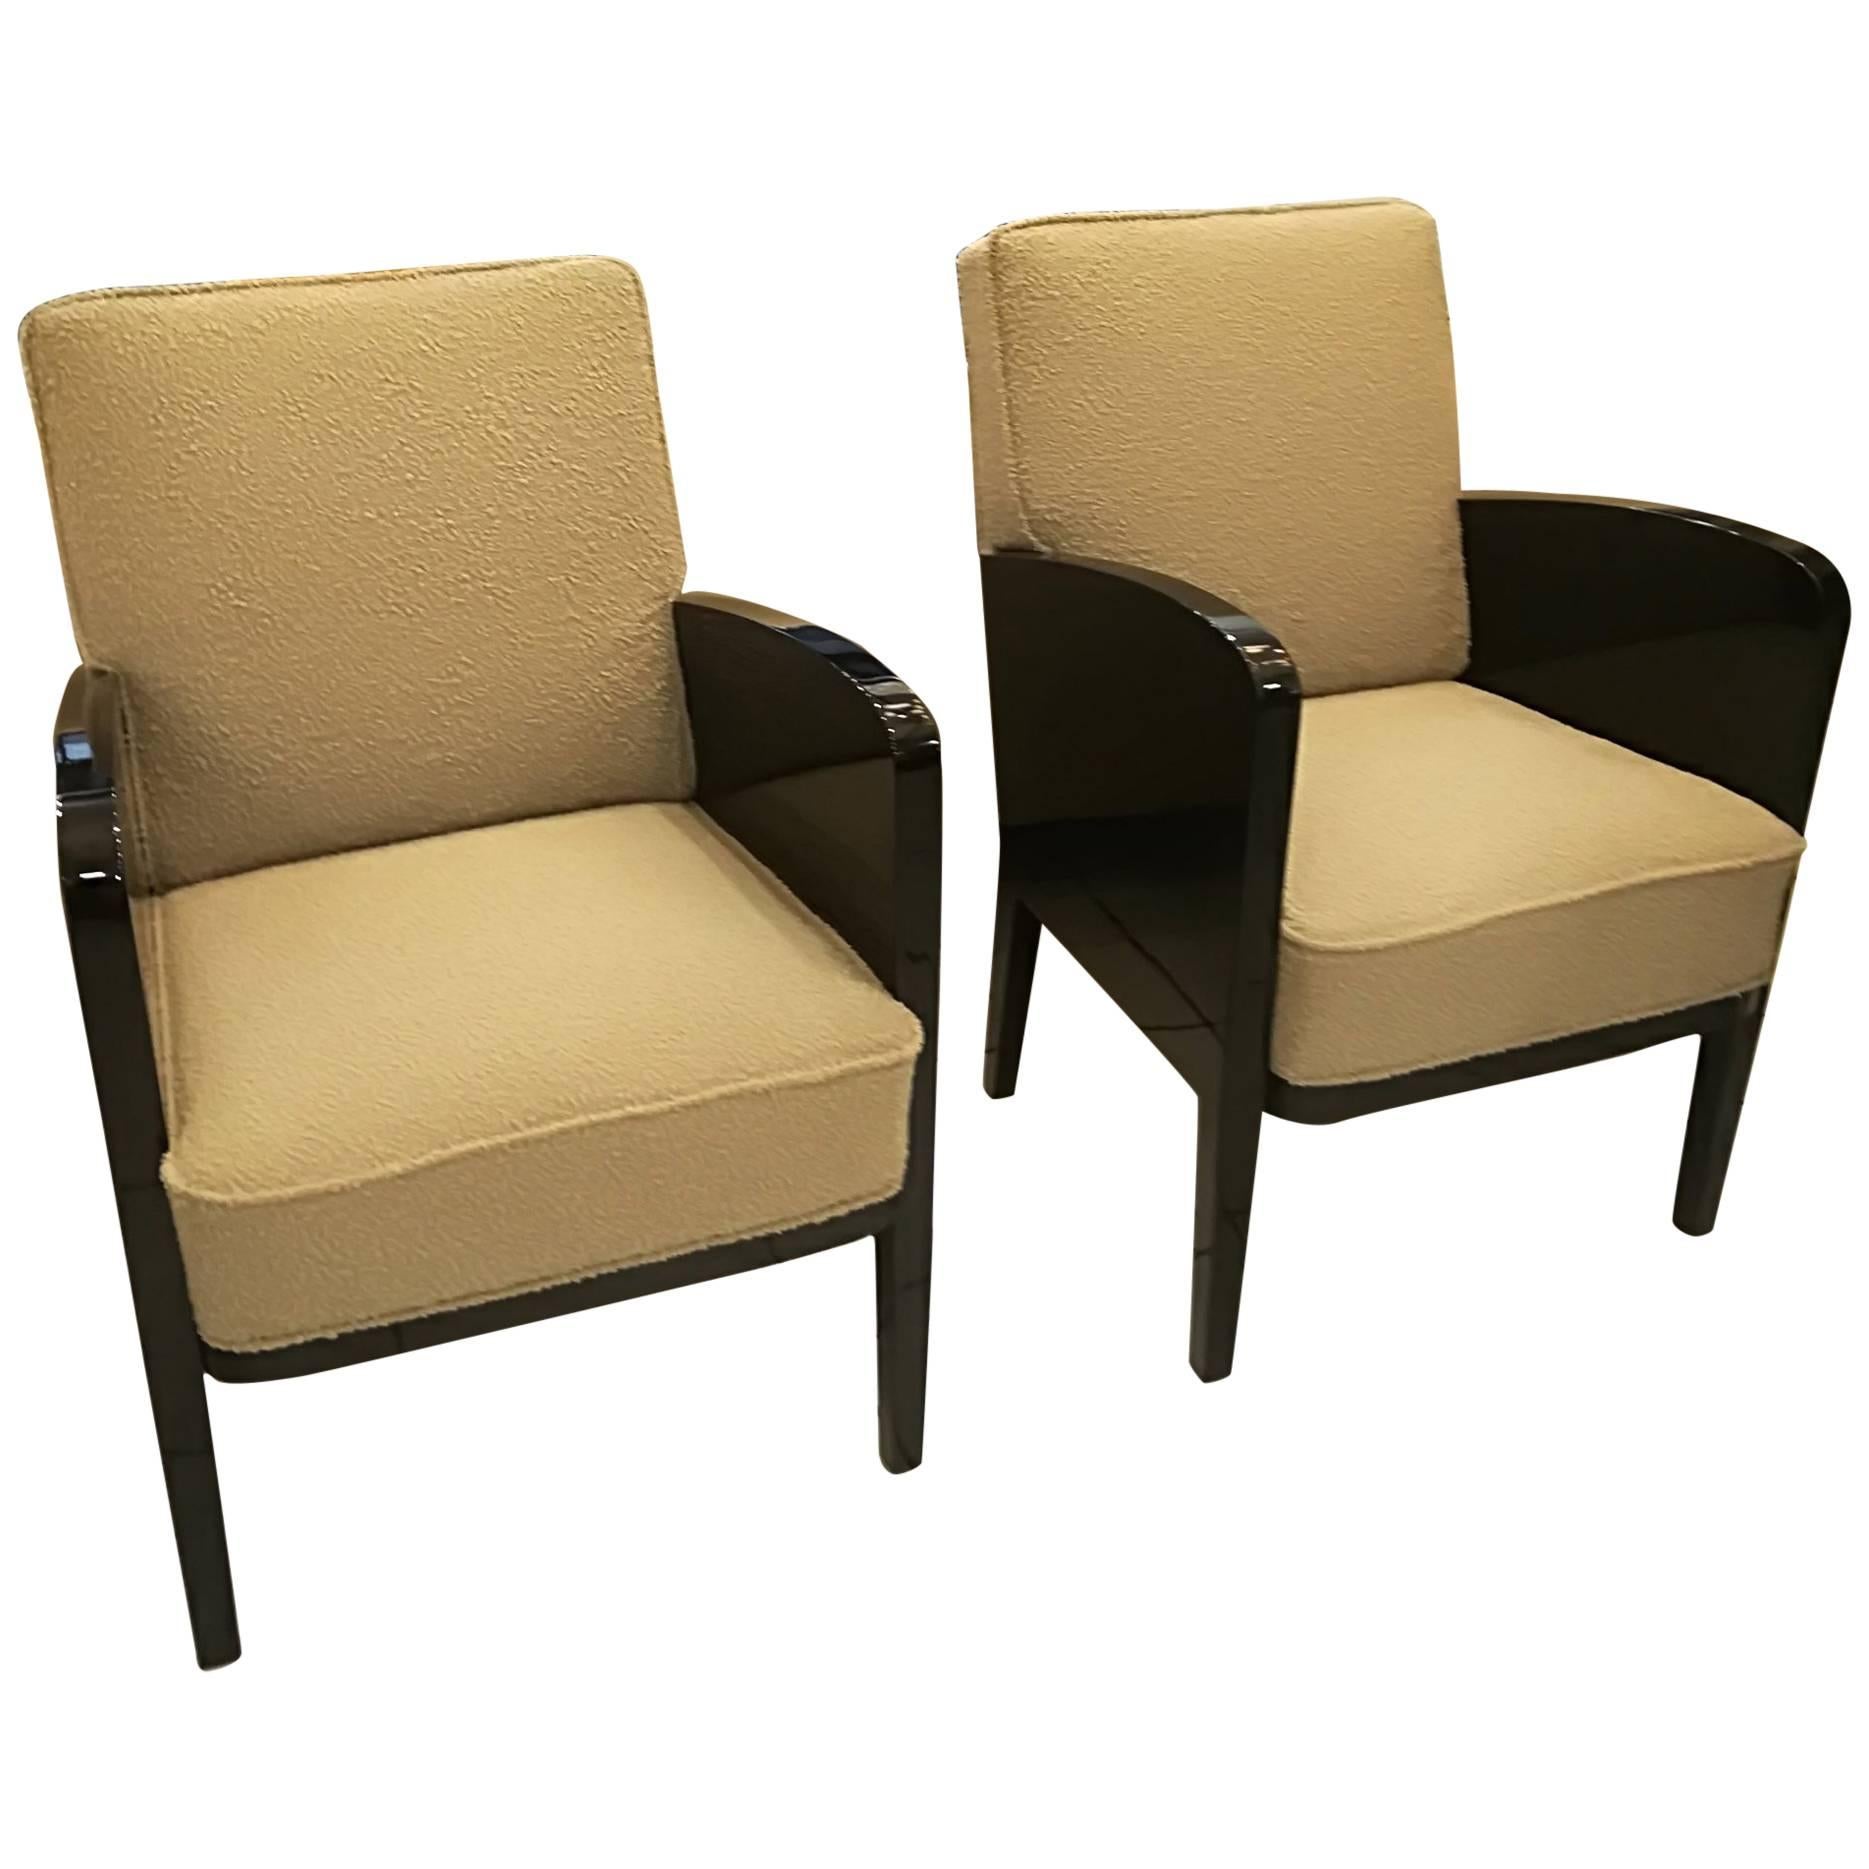 Damon and Berteaux Art Deco Pair of Armchairs, French, circa 1930 For Sale